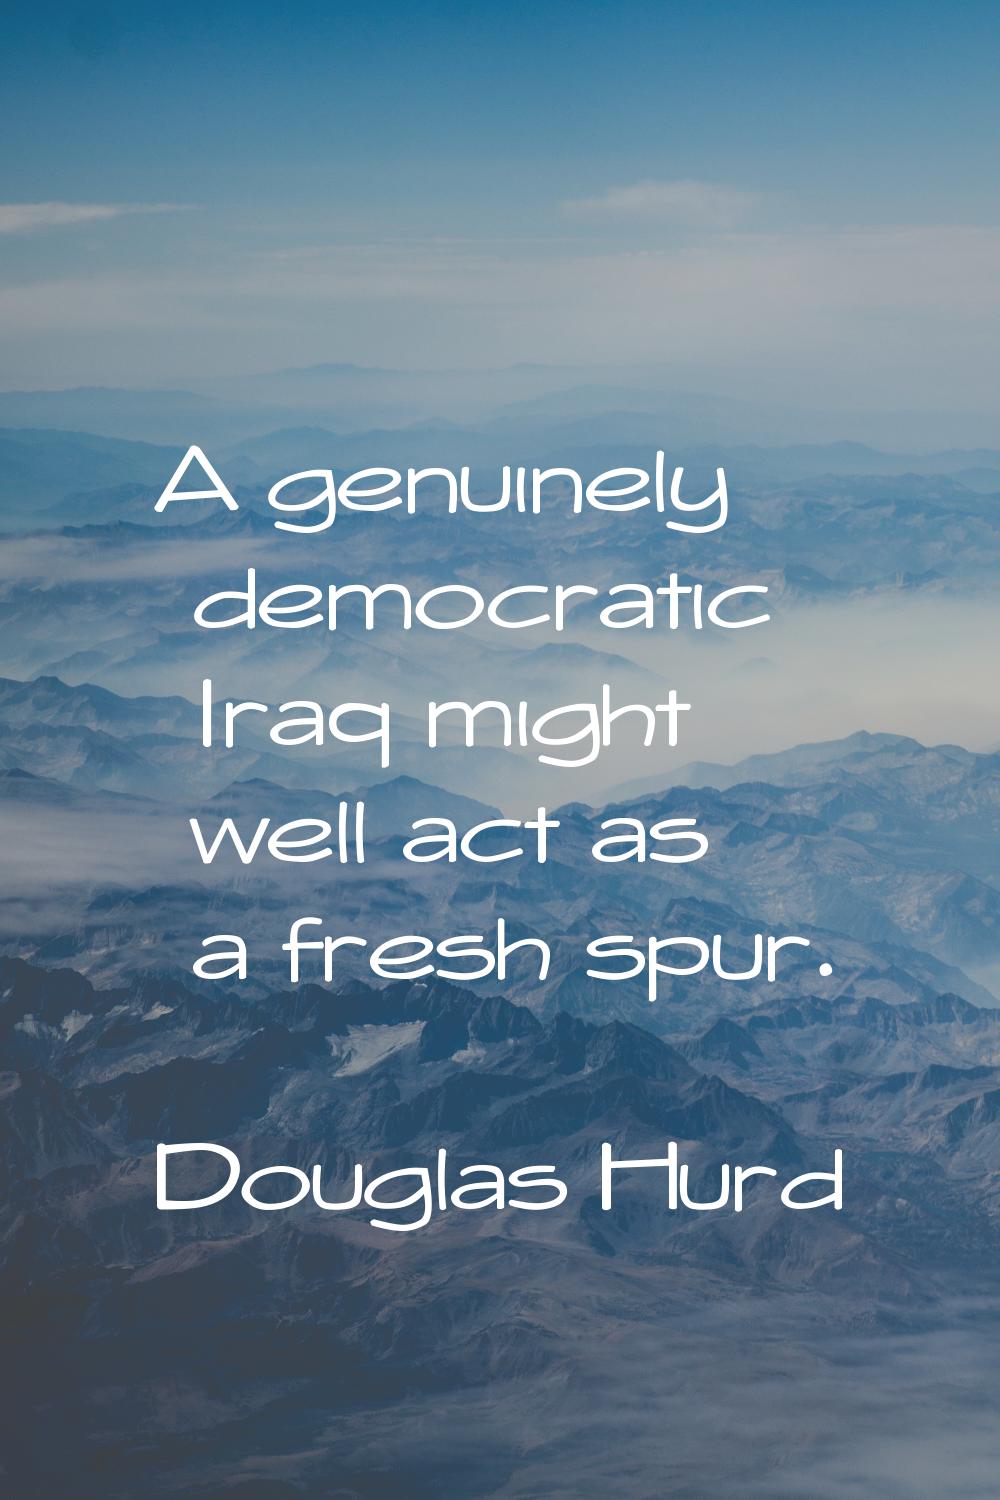 A genuinely democratic Iraq might well act as a fresh spur.